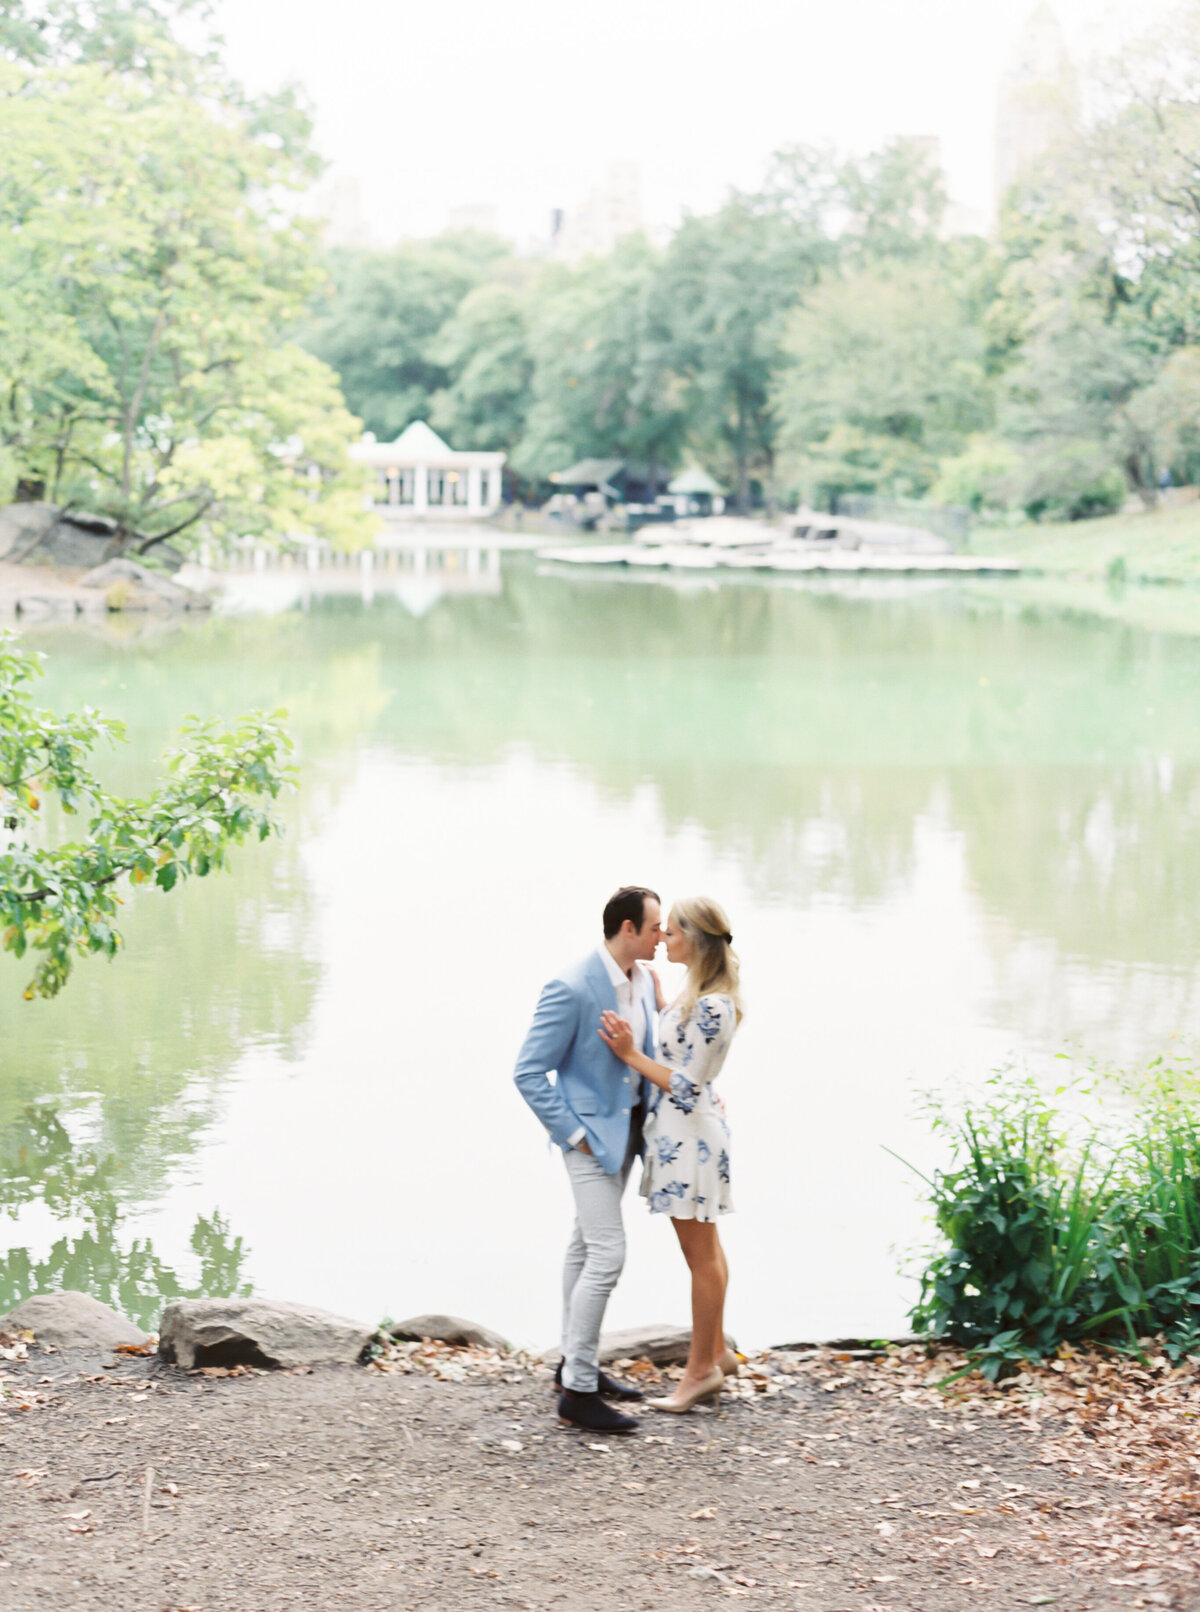 Tiffaney Childs Photography-NYC Wedding Photographer-Andrea + John-Central Park Engagement -106